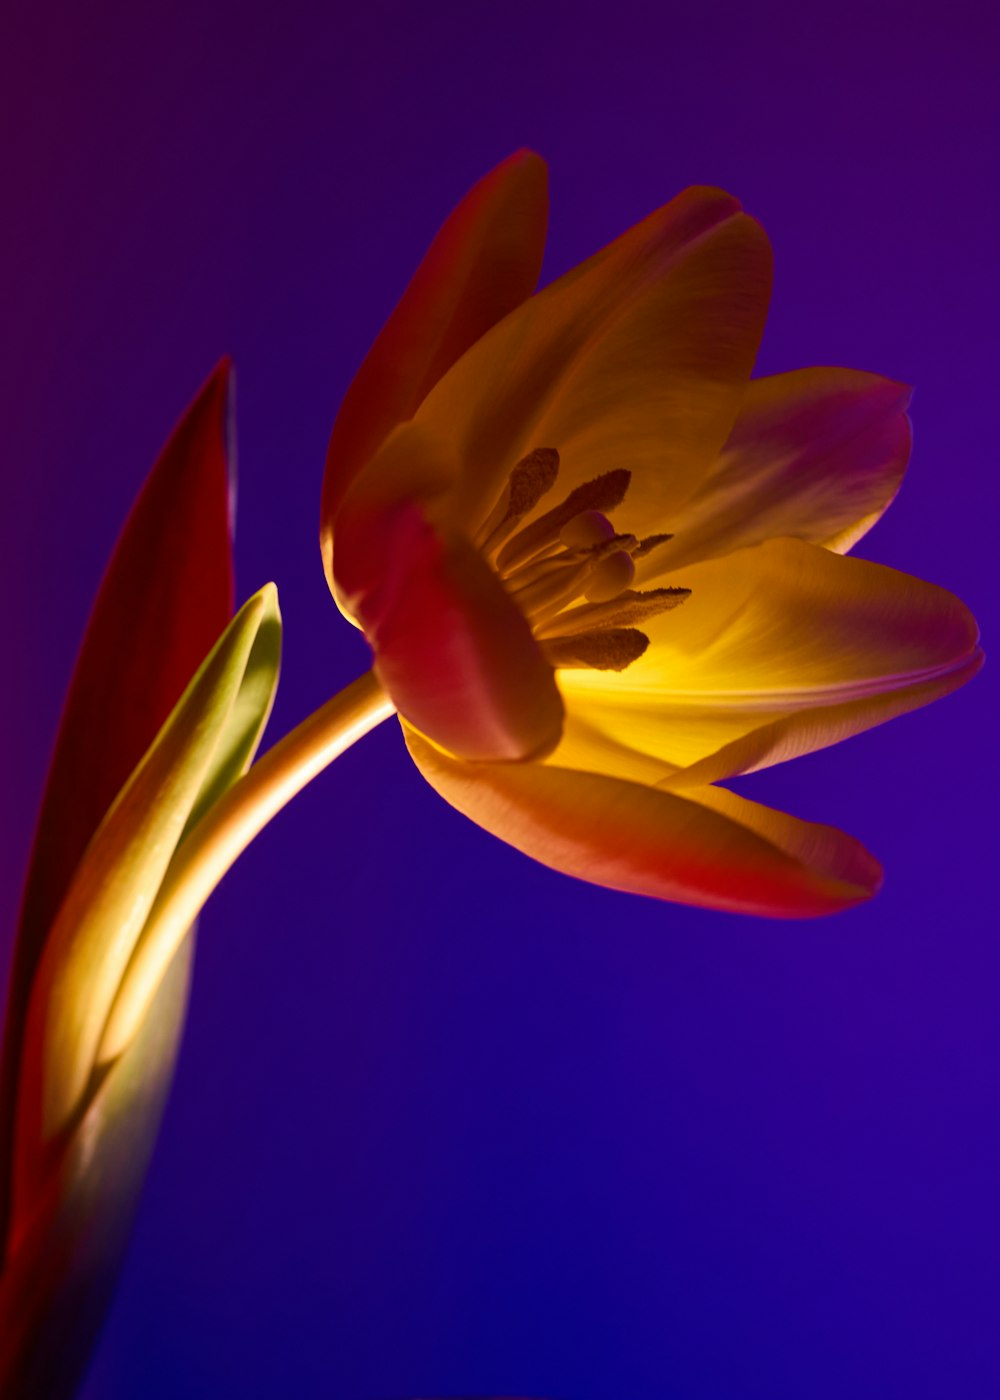 a close up of a flower with a blue background